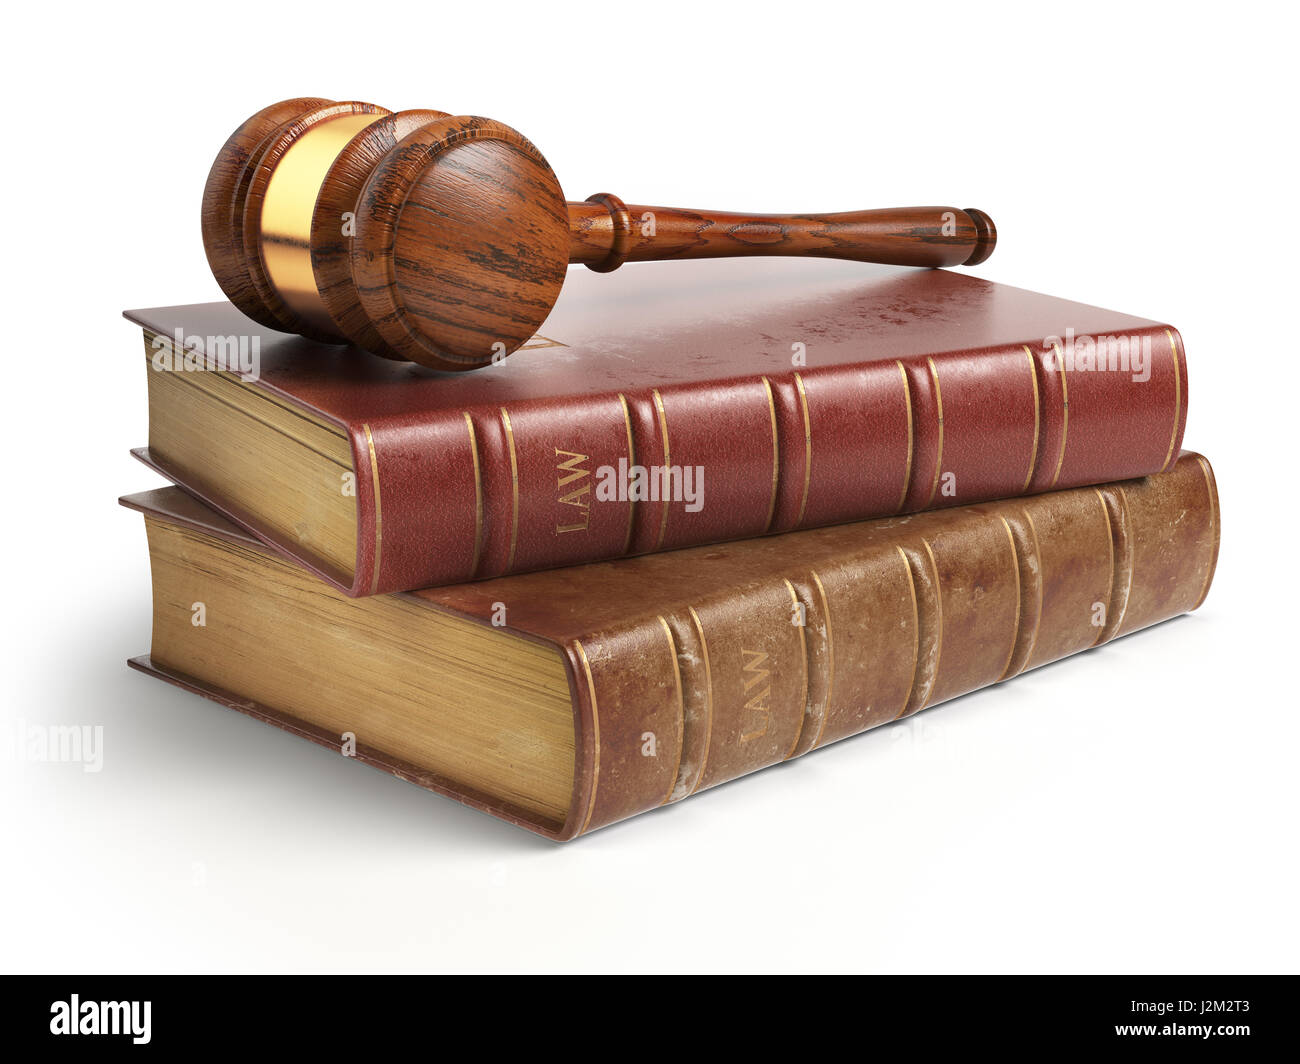 Gavel and lawyer books isolated on white. Justice, law and legal concept. 3d illustration Stock Photo